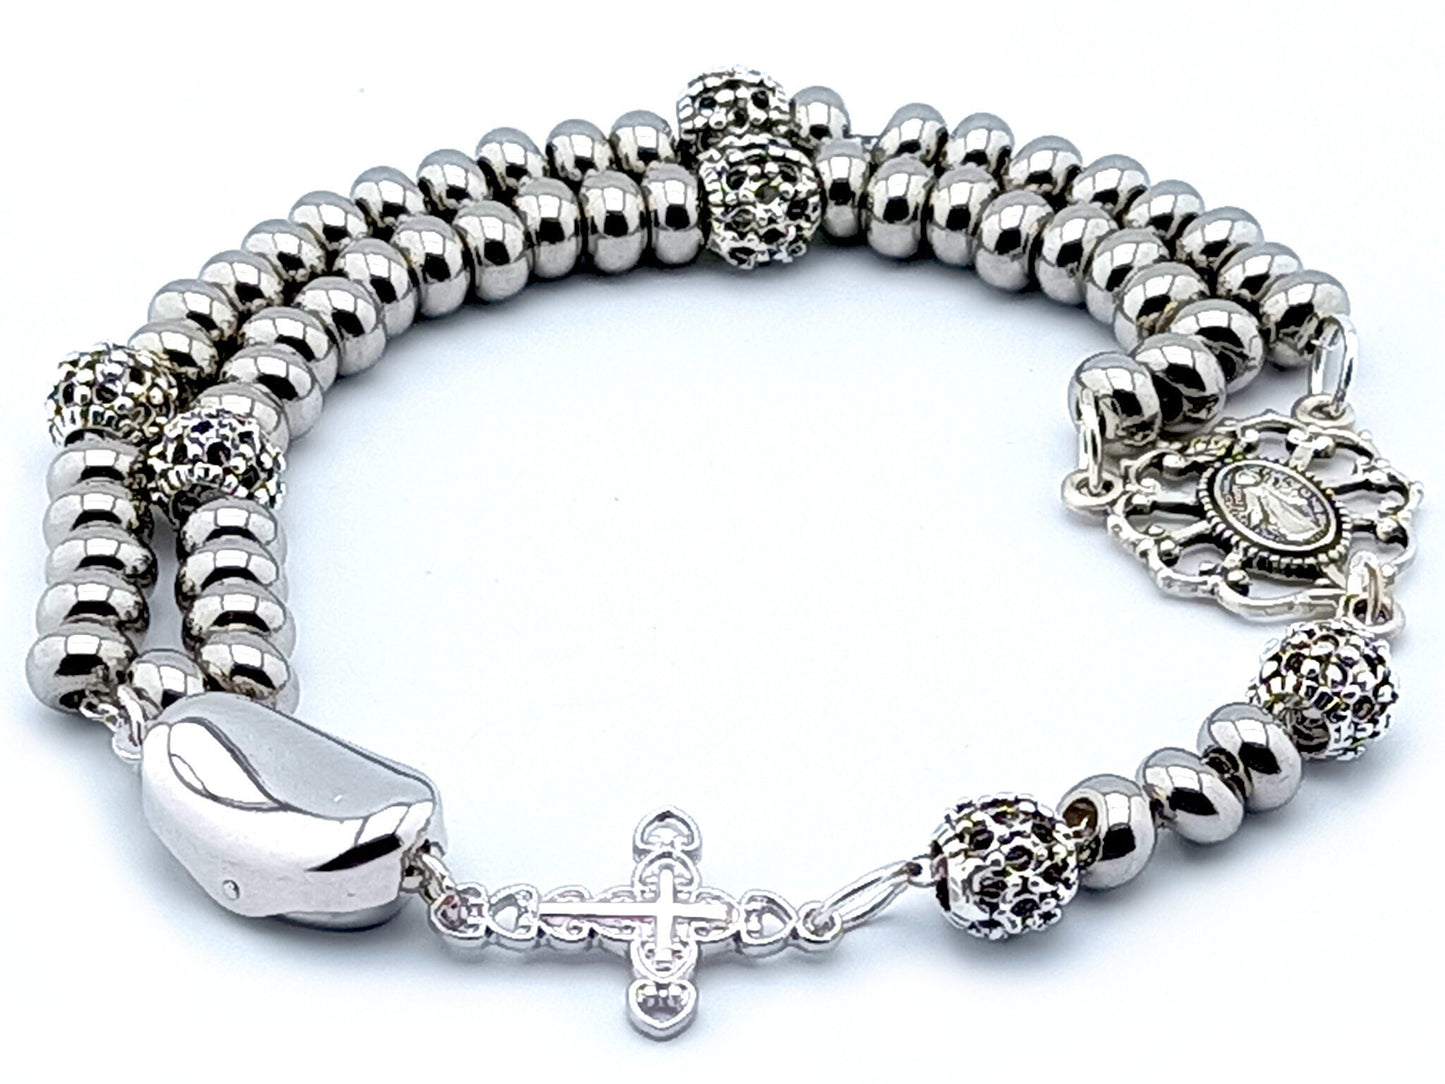 Genuine 925 Sterling silver unique rosary beads bracelet with stainless steel beads, 925 silver Miraculous medal, cross and spring clasp.